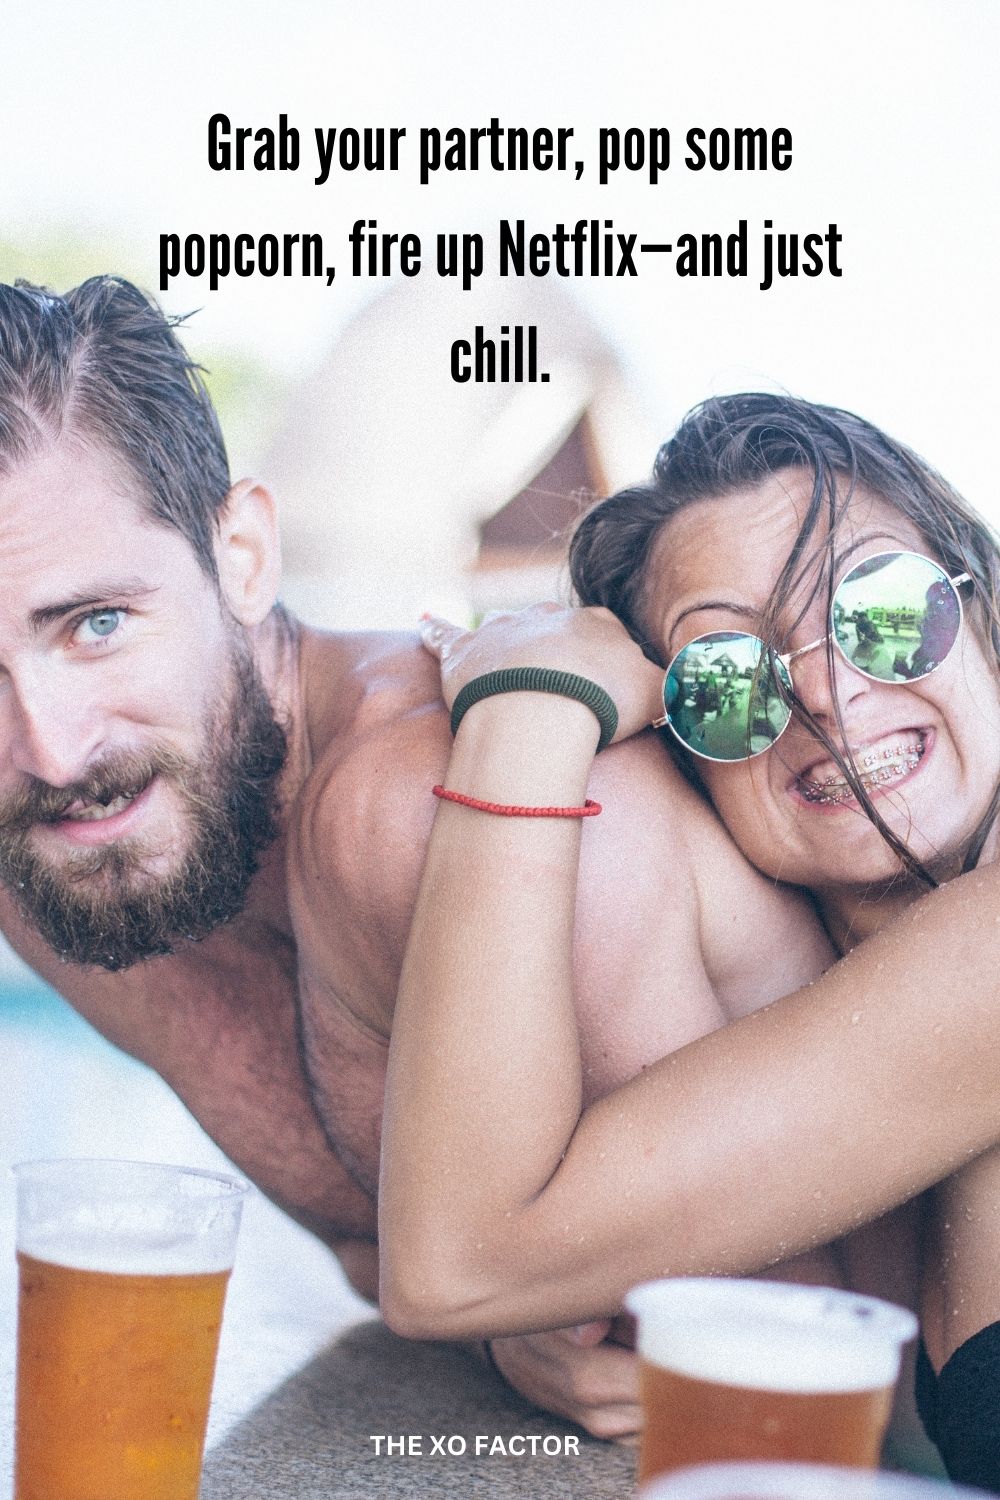 Grab your partner, pop some popcorn, fire up Netflix—and just chill.